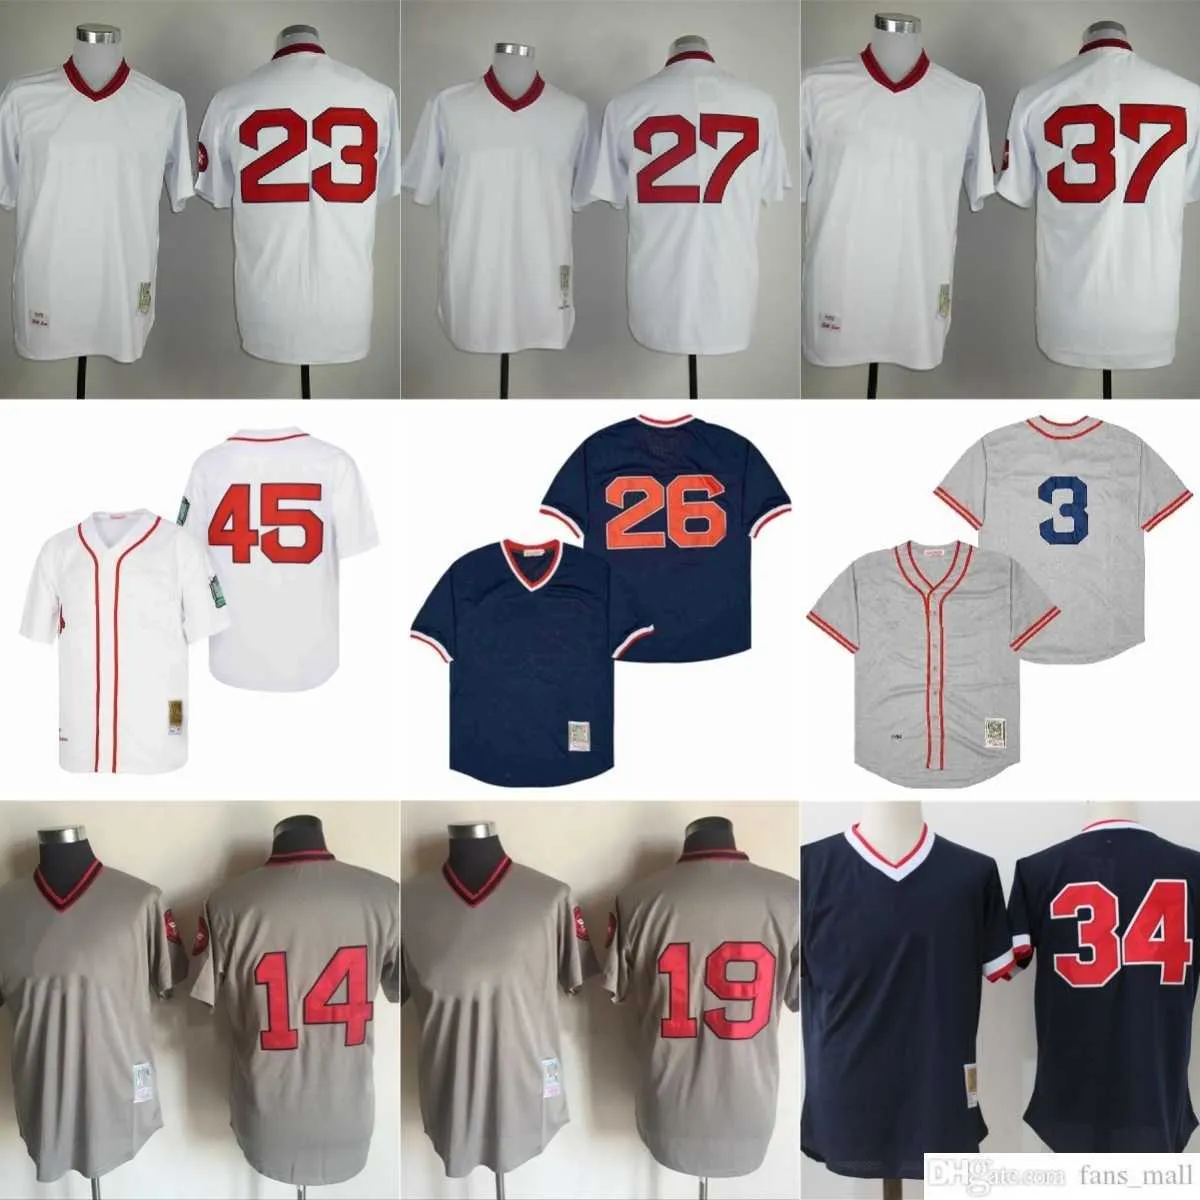 1938 Throwback Vintage Baseball 34 David Ortiz Jerseys NCAA Stitched 26 Wade Boggs 14 Jim Rice Jersey Breathable Sport Navy Blue Pullover White Grey